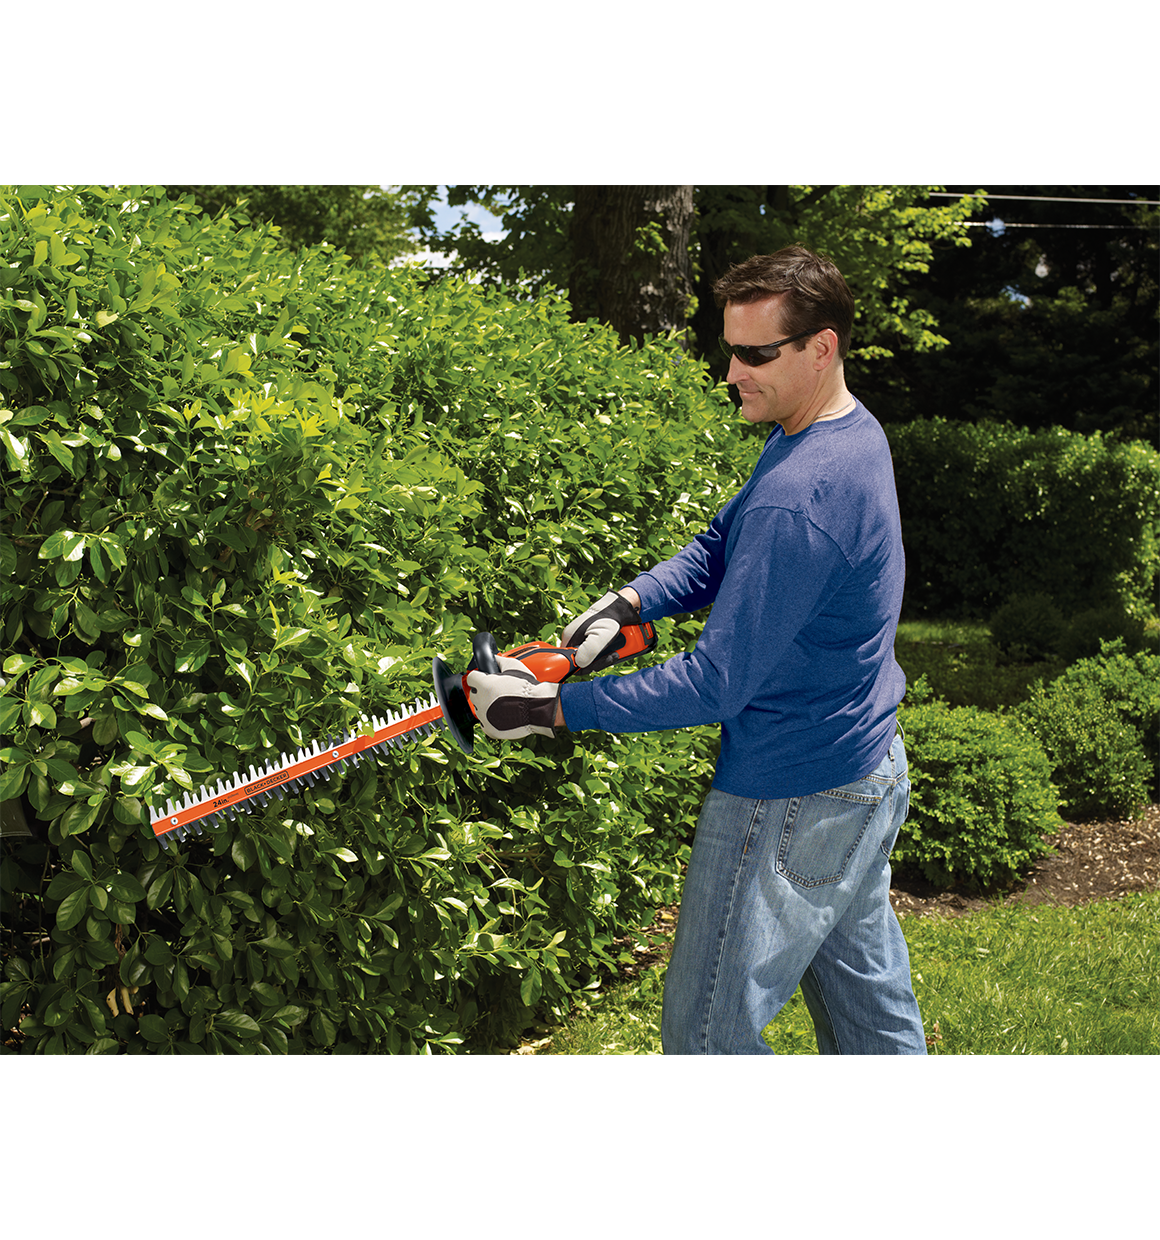 BLACK+DECKER LHT2436 40V MAX* Lithium-Ion 24 Cordless Hedge Trimmer,  Battery and Charger Included